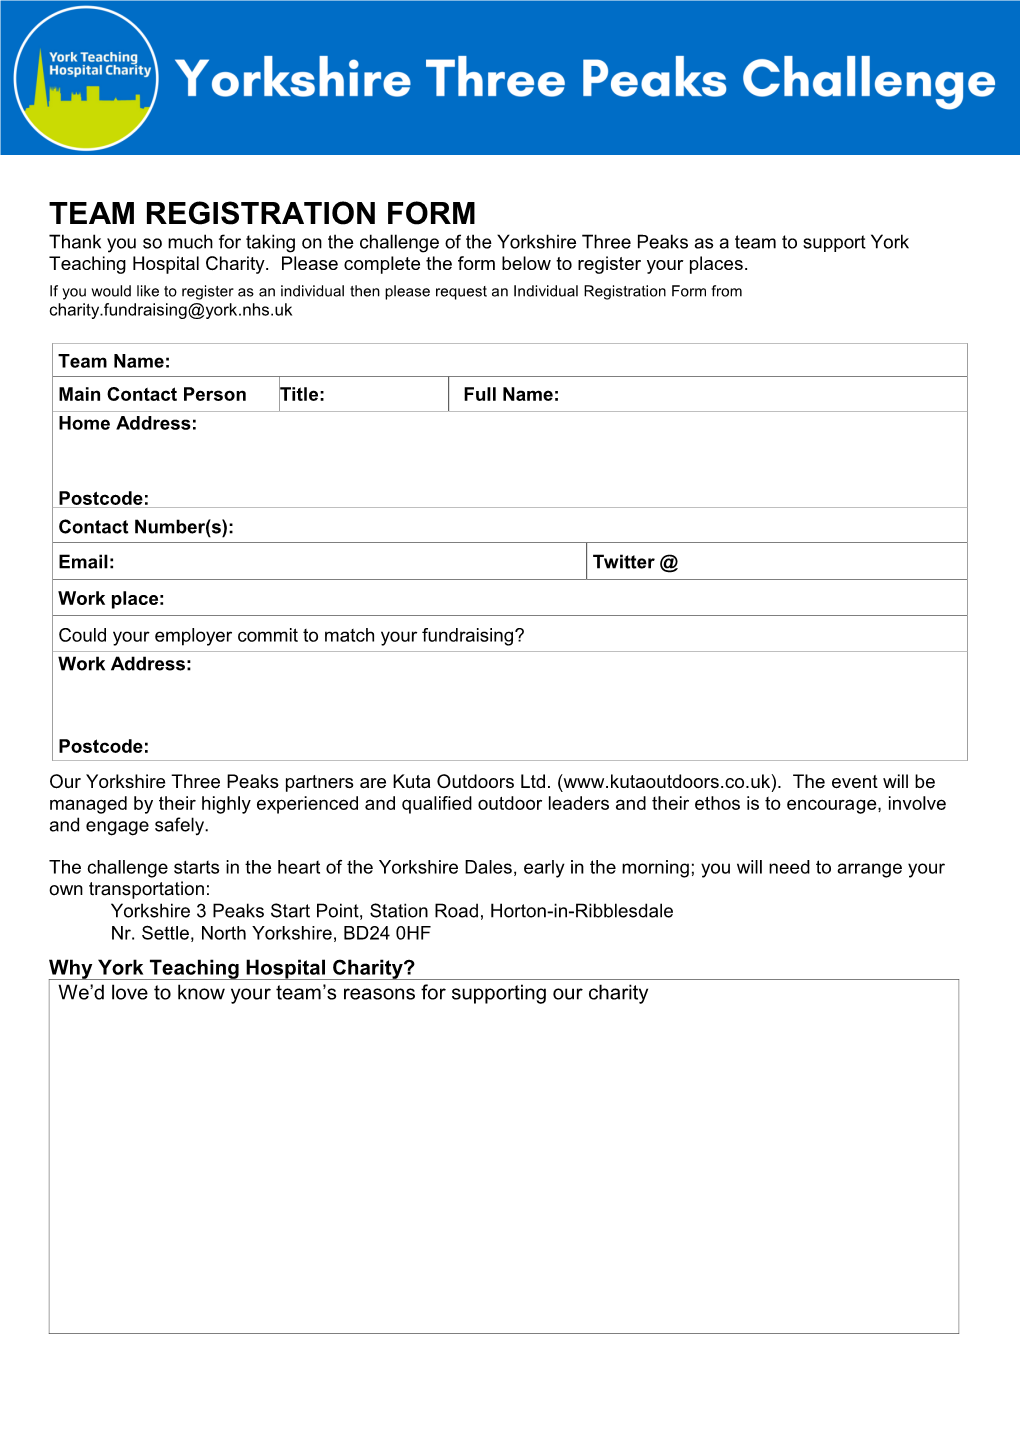 TEAM REGISTRATION FORM Thank You So Much for Taking on the Challenge of the Yorkshire Three Peaks As a Team to Support York Teaching Hospital Charity